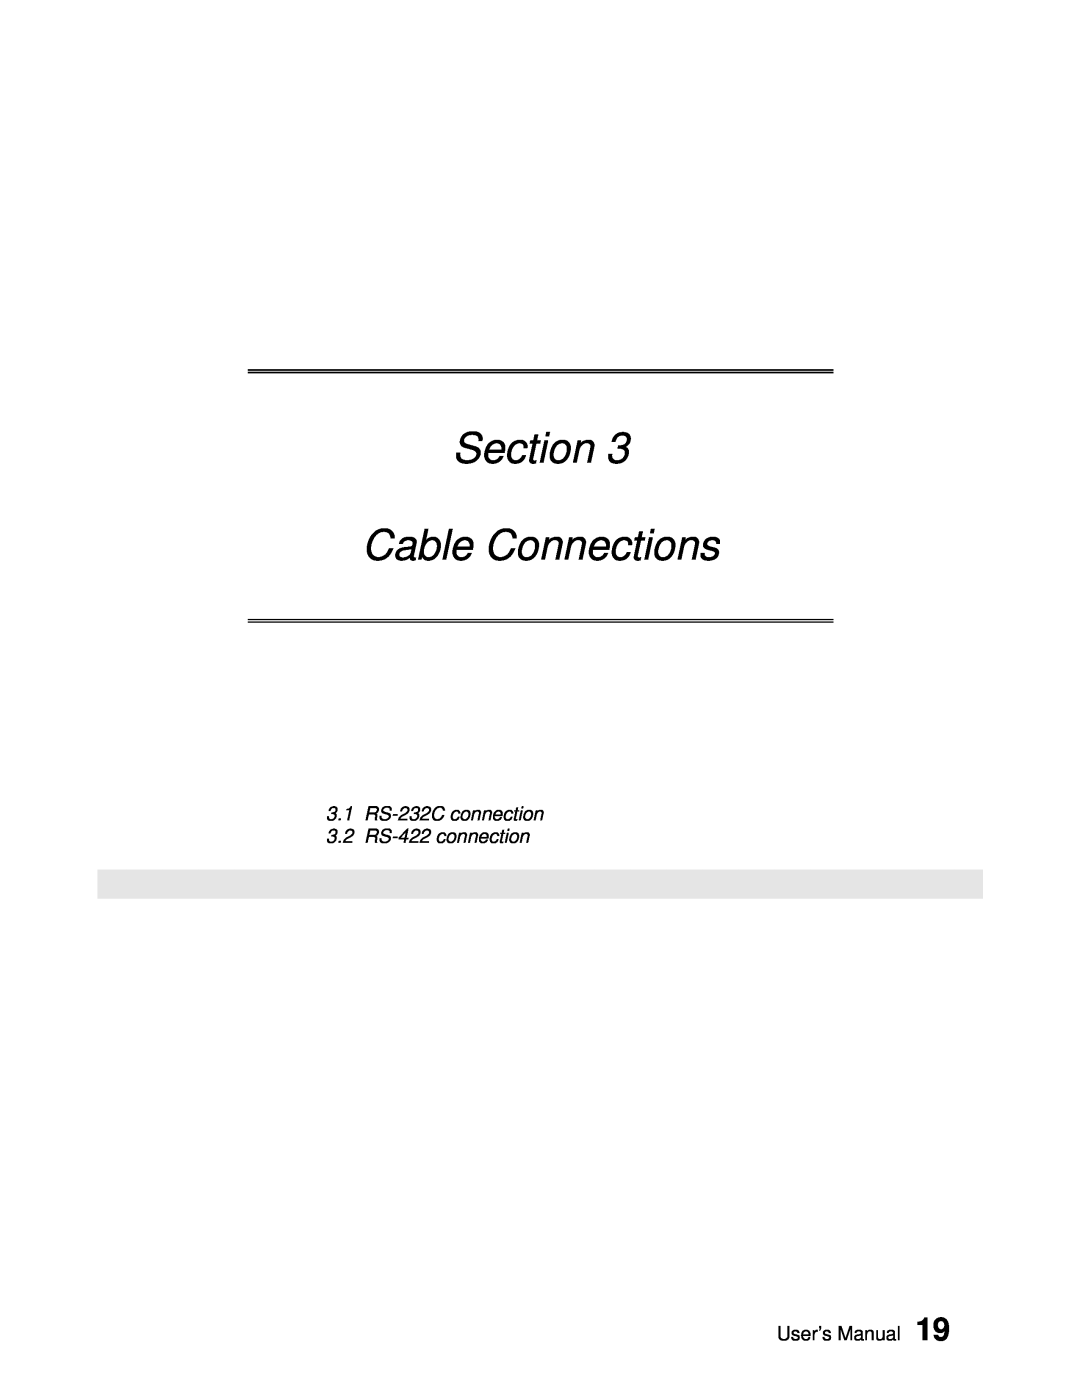 Toshiba AS311 user manual Section Cable Connections, 3.1 RS-232C connection 3.2 RS-422 connection 